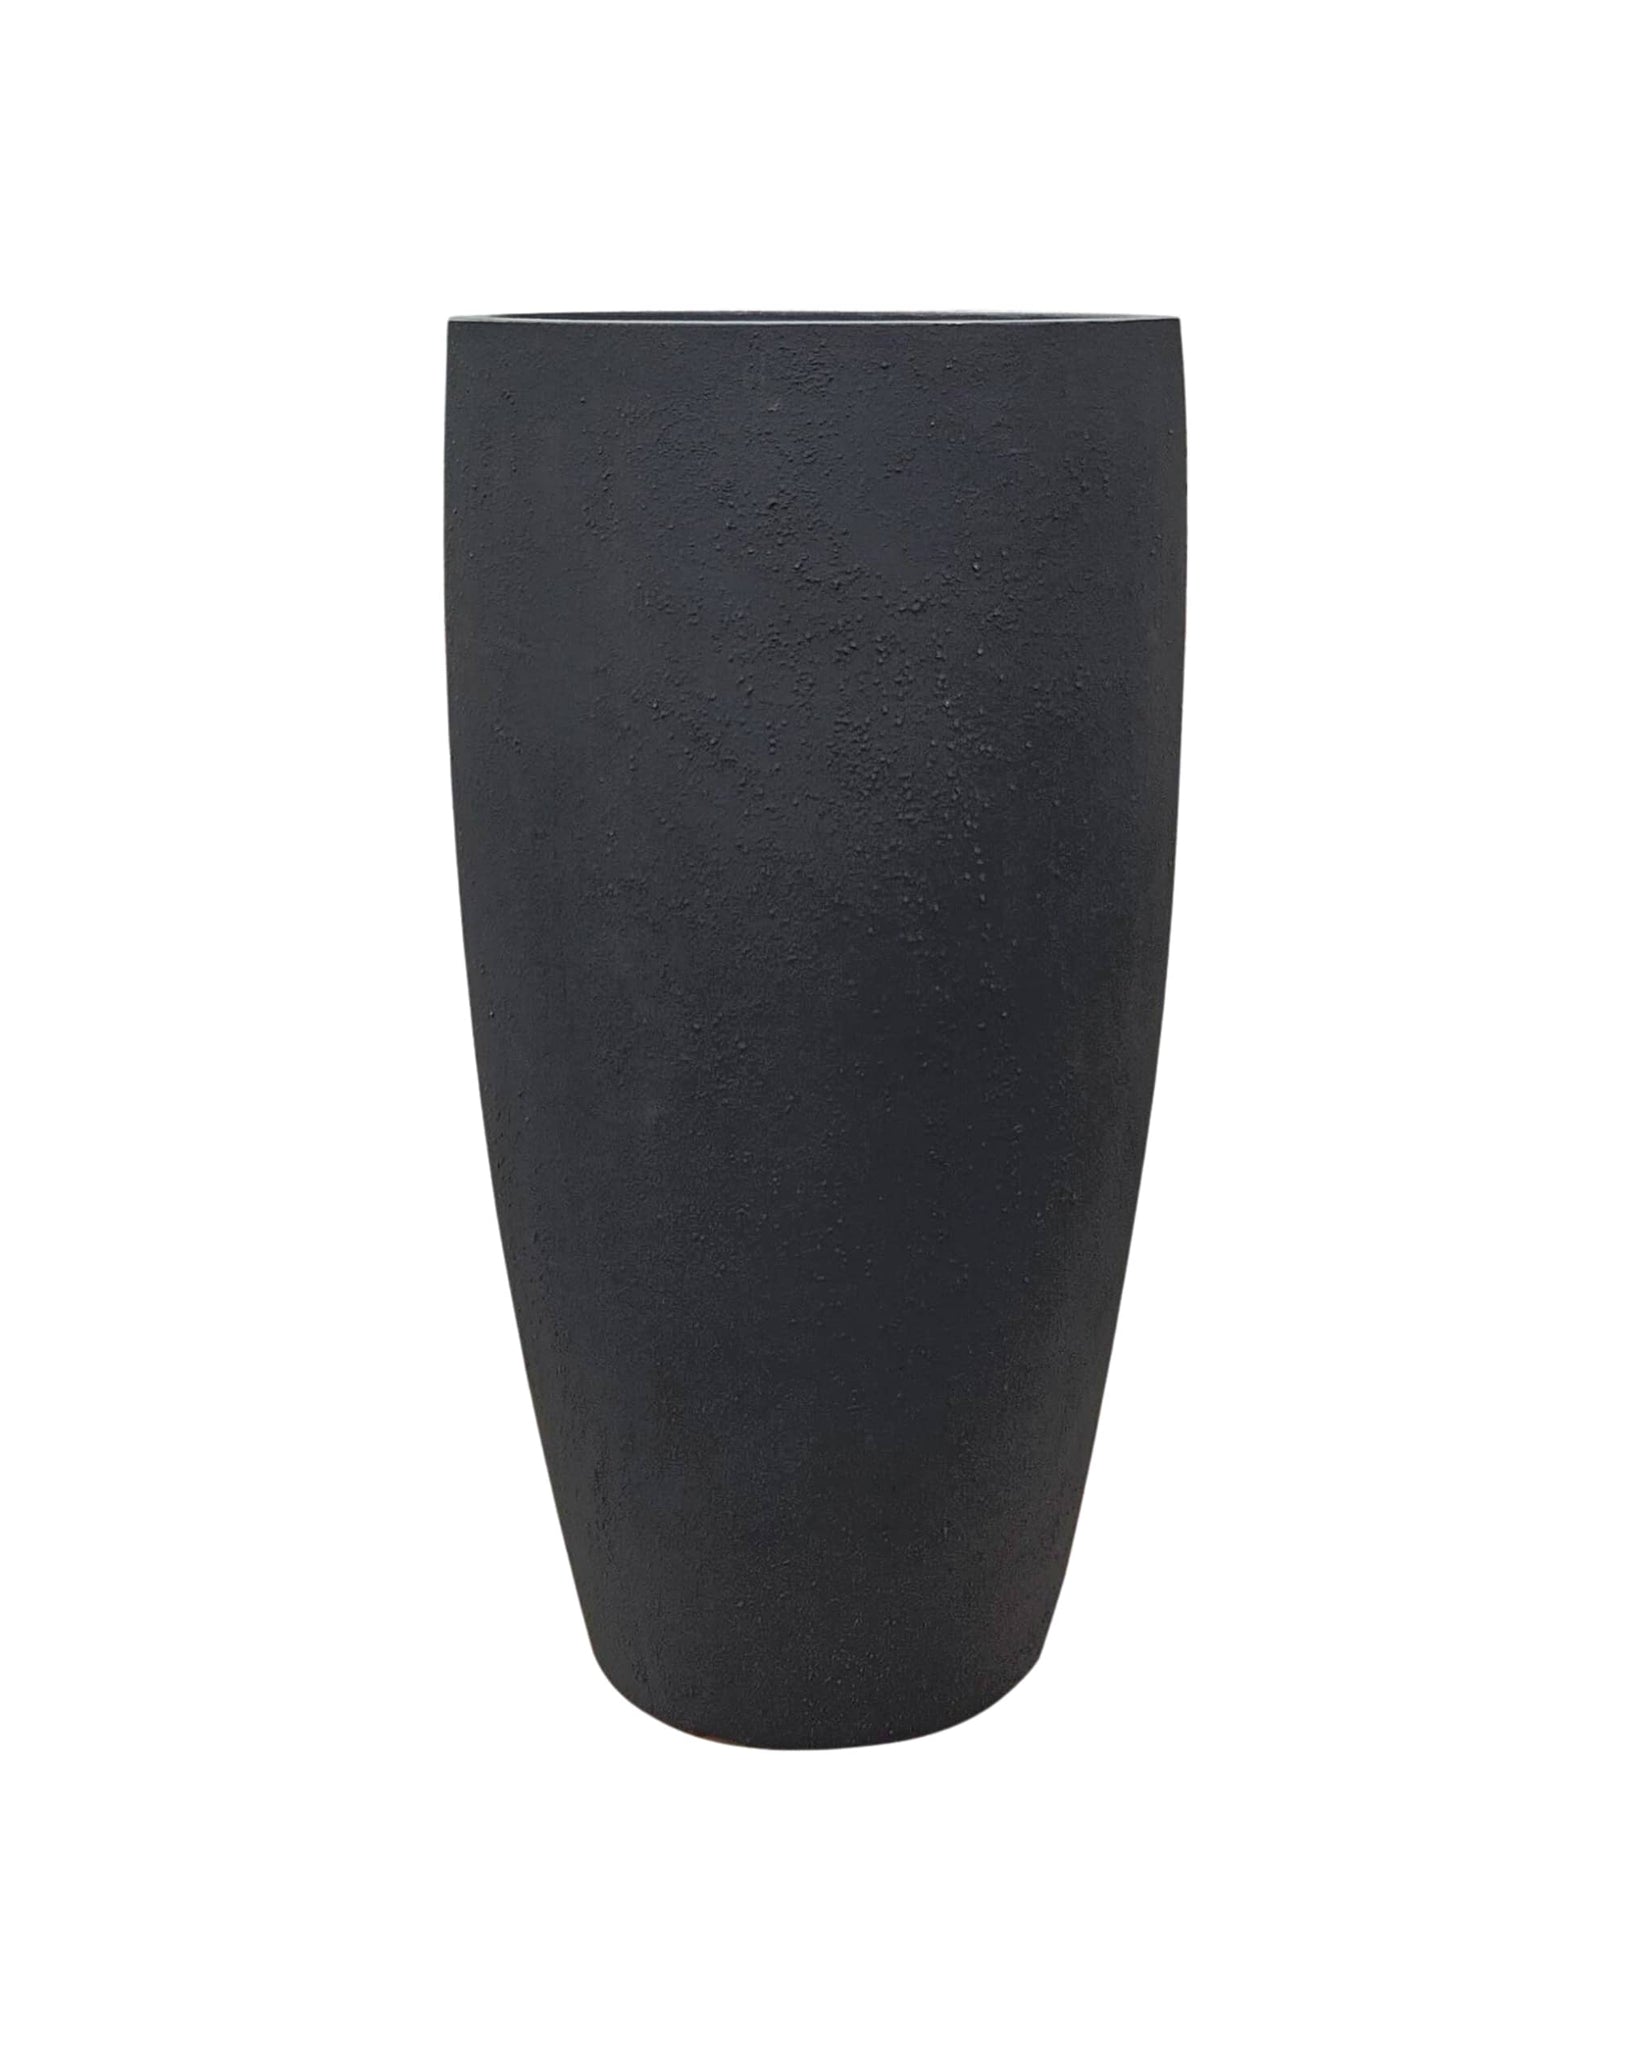 Conic Slim Japi Planter with a textured finish of little bumps randomly placed on an otherwise smooth surface. Colour lead. Tall and slim, tapering in at the bottom. Streamline. Florastyle by Hingham.